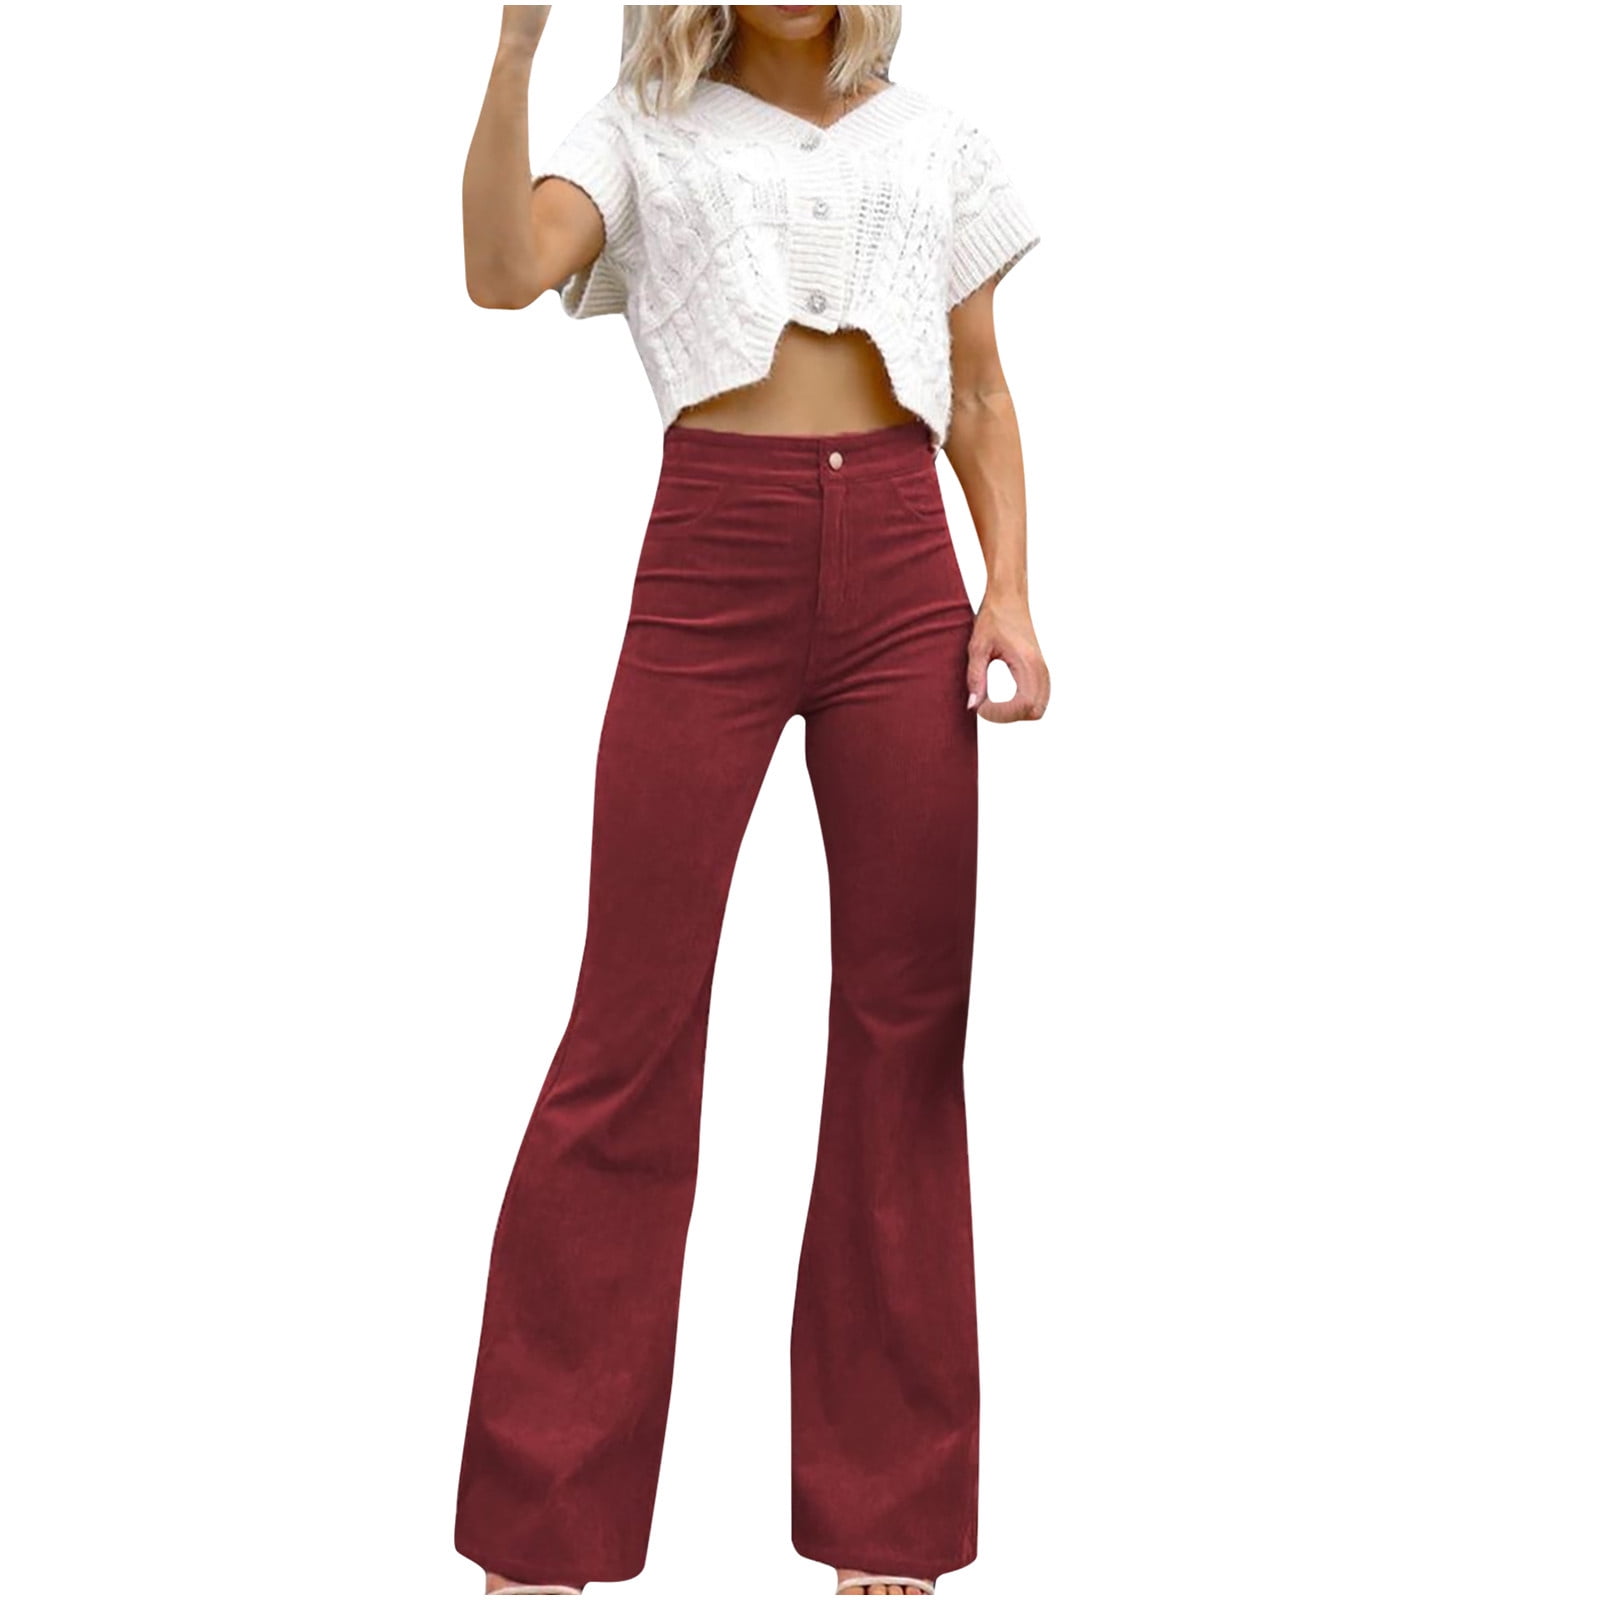 HOOUDO Womens Bootcut Corduroy Trousers High Waist Stretchy Flare Pants  Elastic Waist Bell Bottom Streetwear Casual Pants Ladies Clothes Lounge  Wear Plus Size Brown - ShopStyle